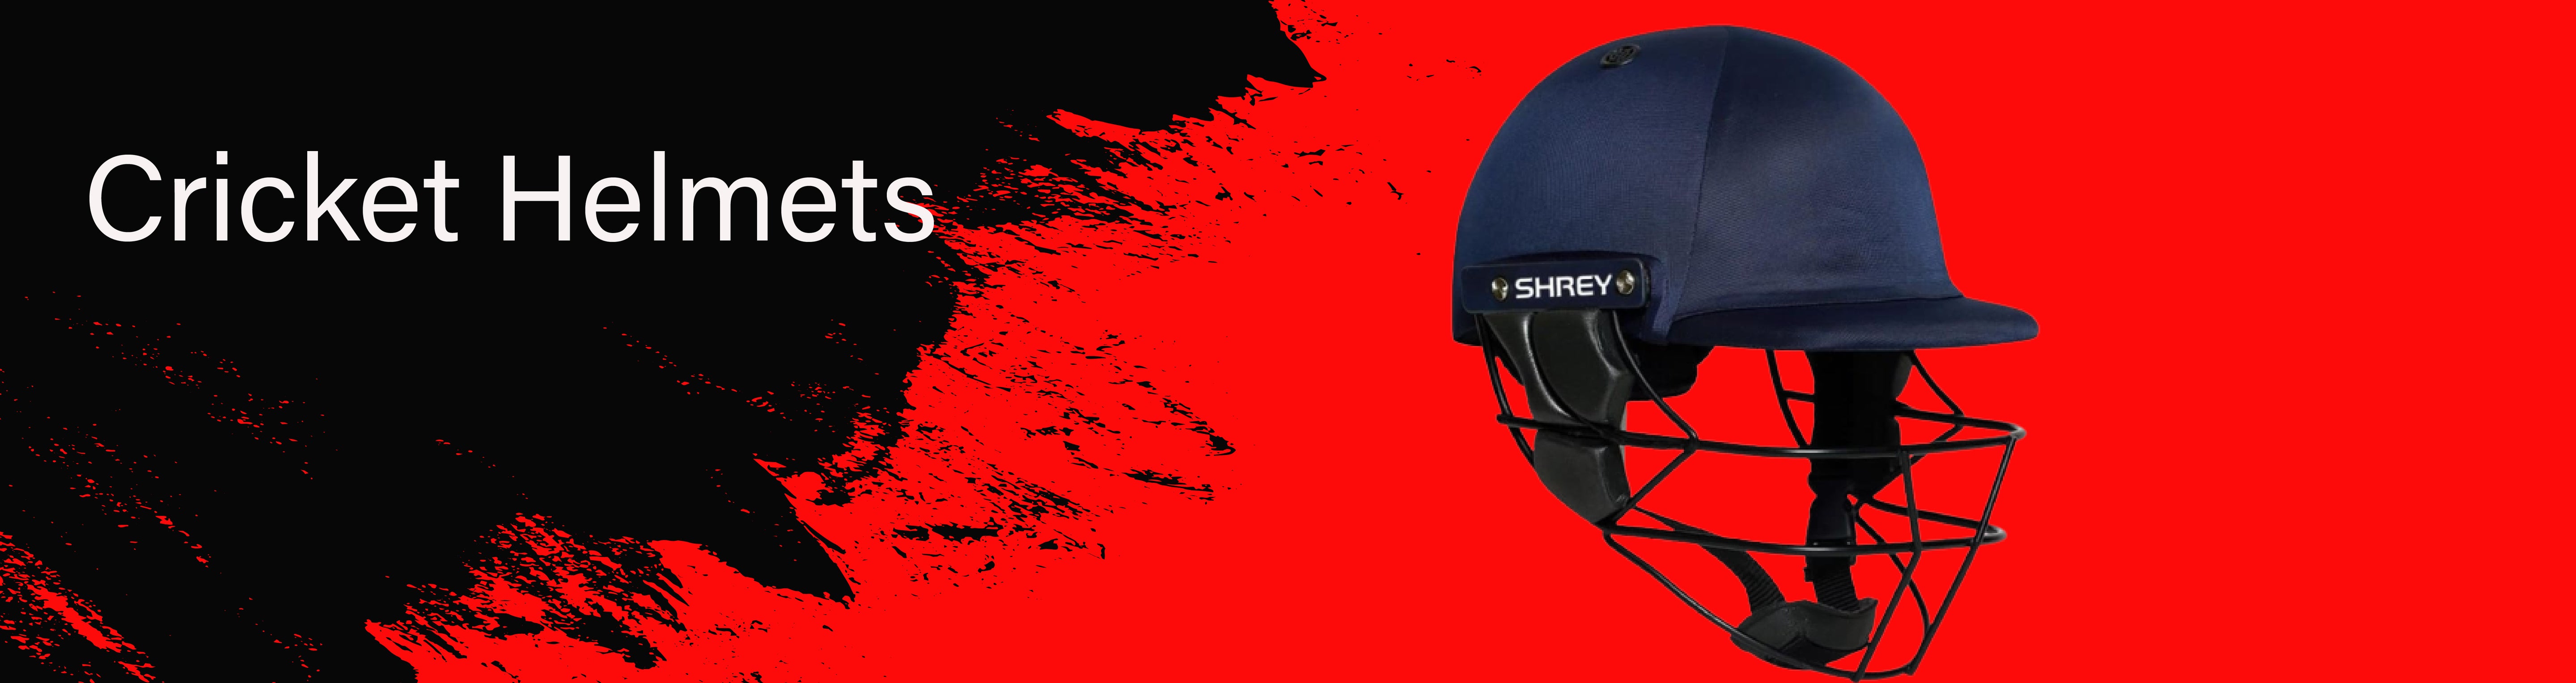 Collection Image Cricket Helmets